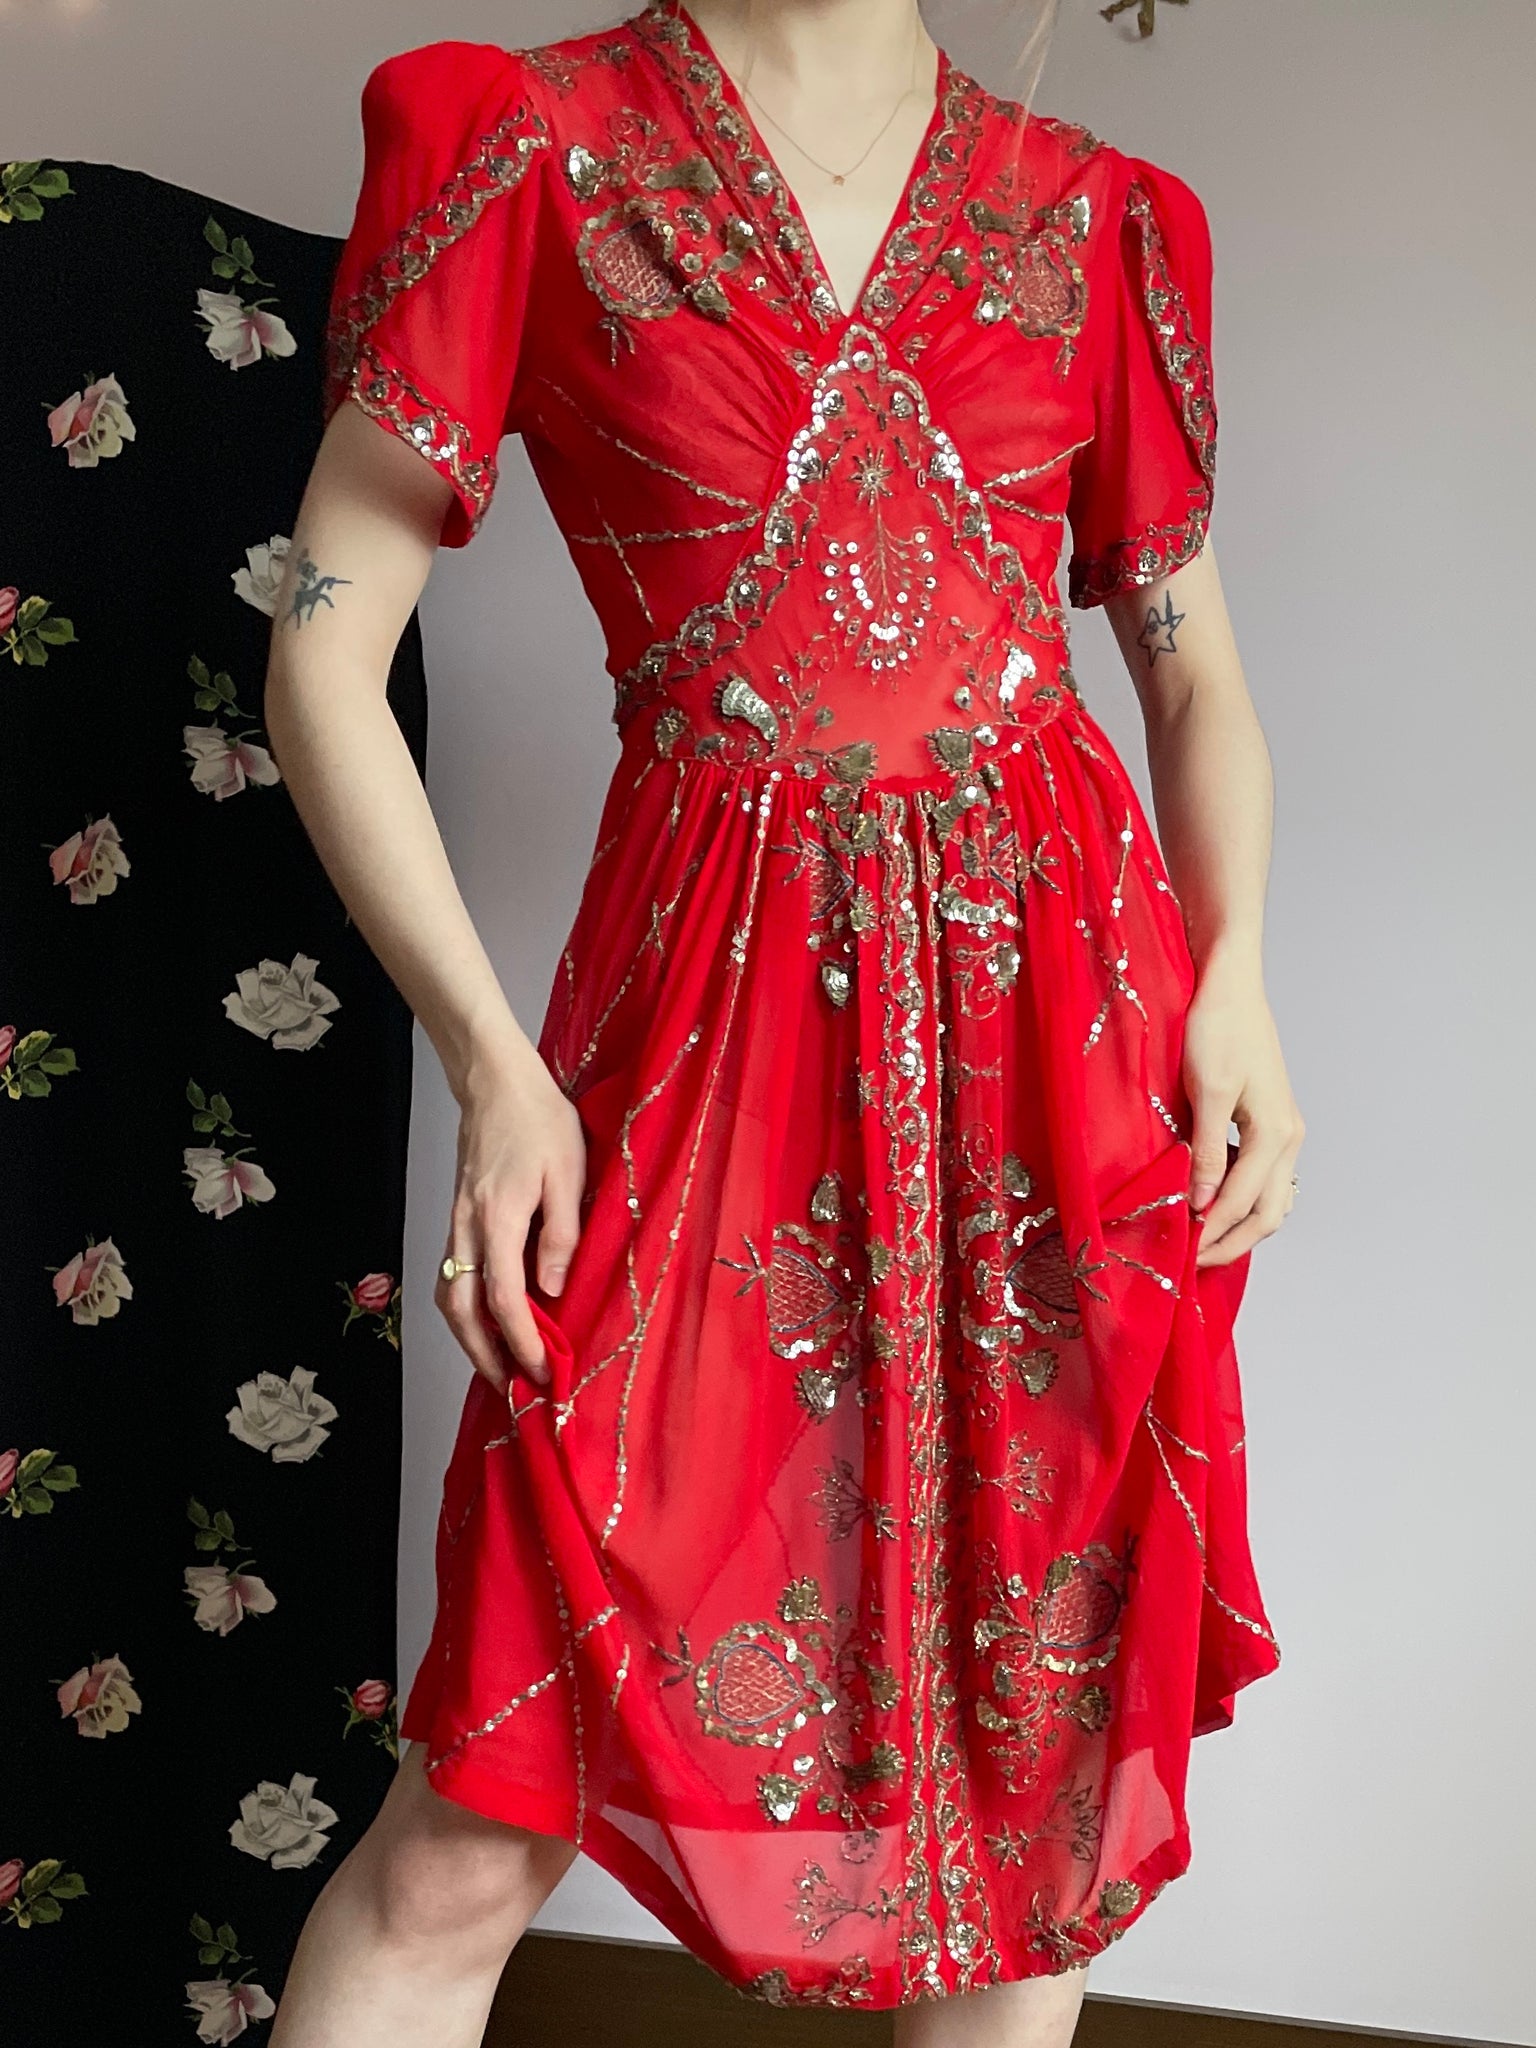 1940s Red Silk Chiffon Sequin Embroidered Dress Tulip Puff Sleeve